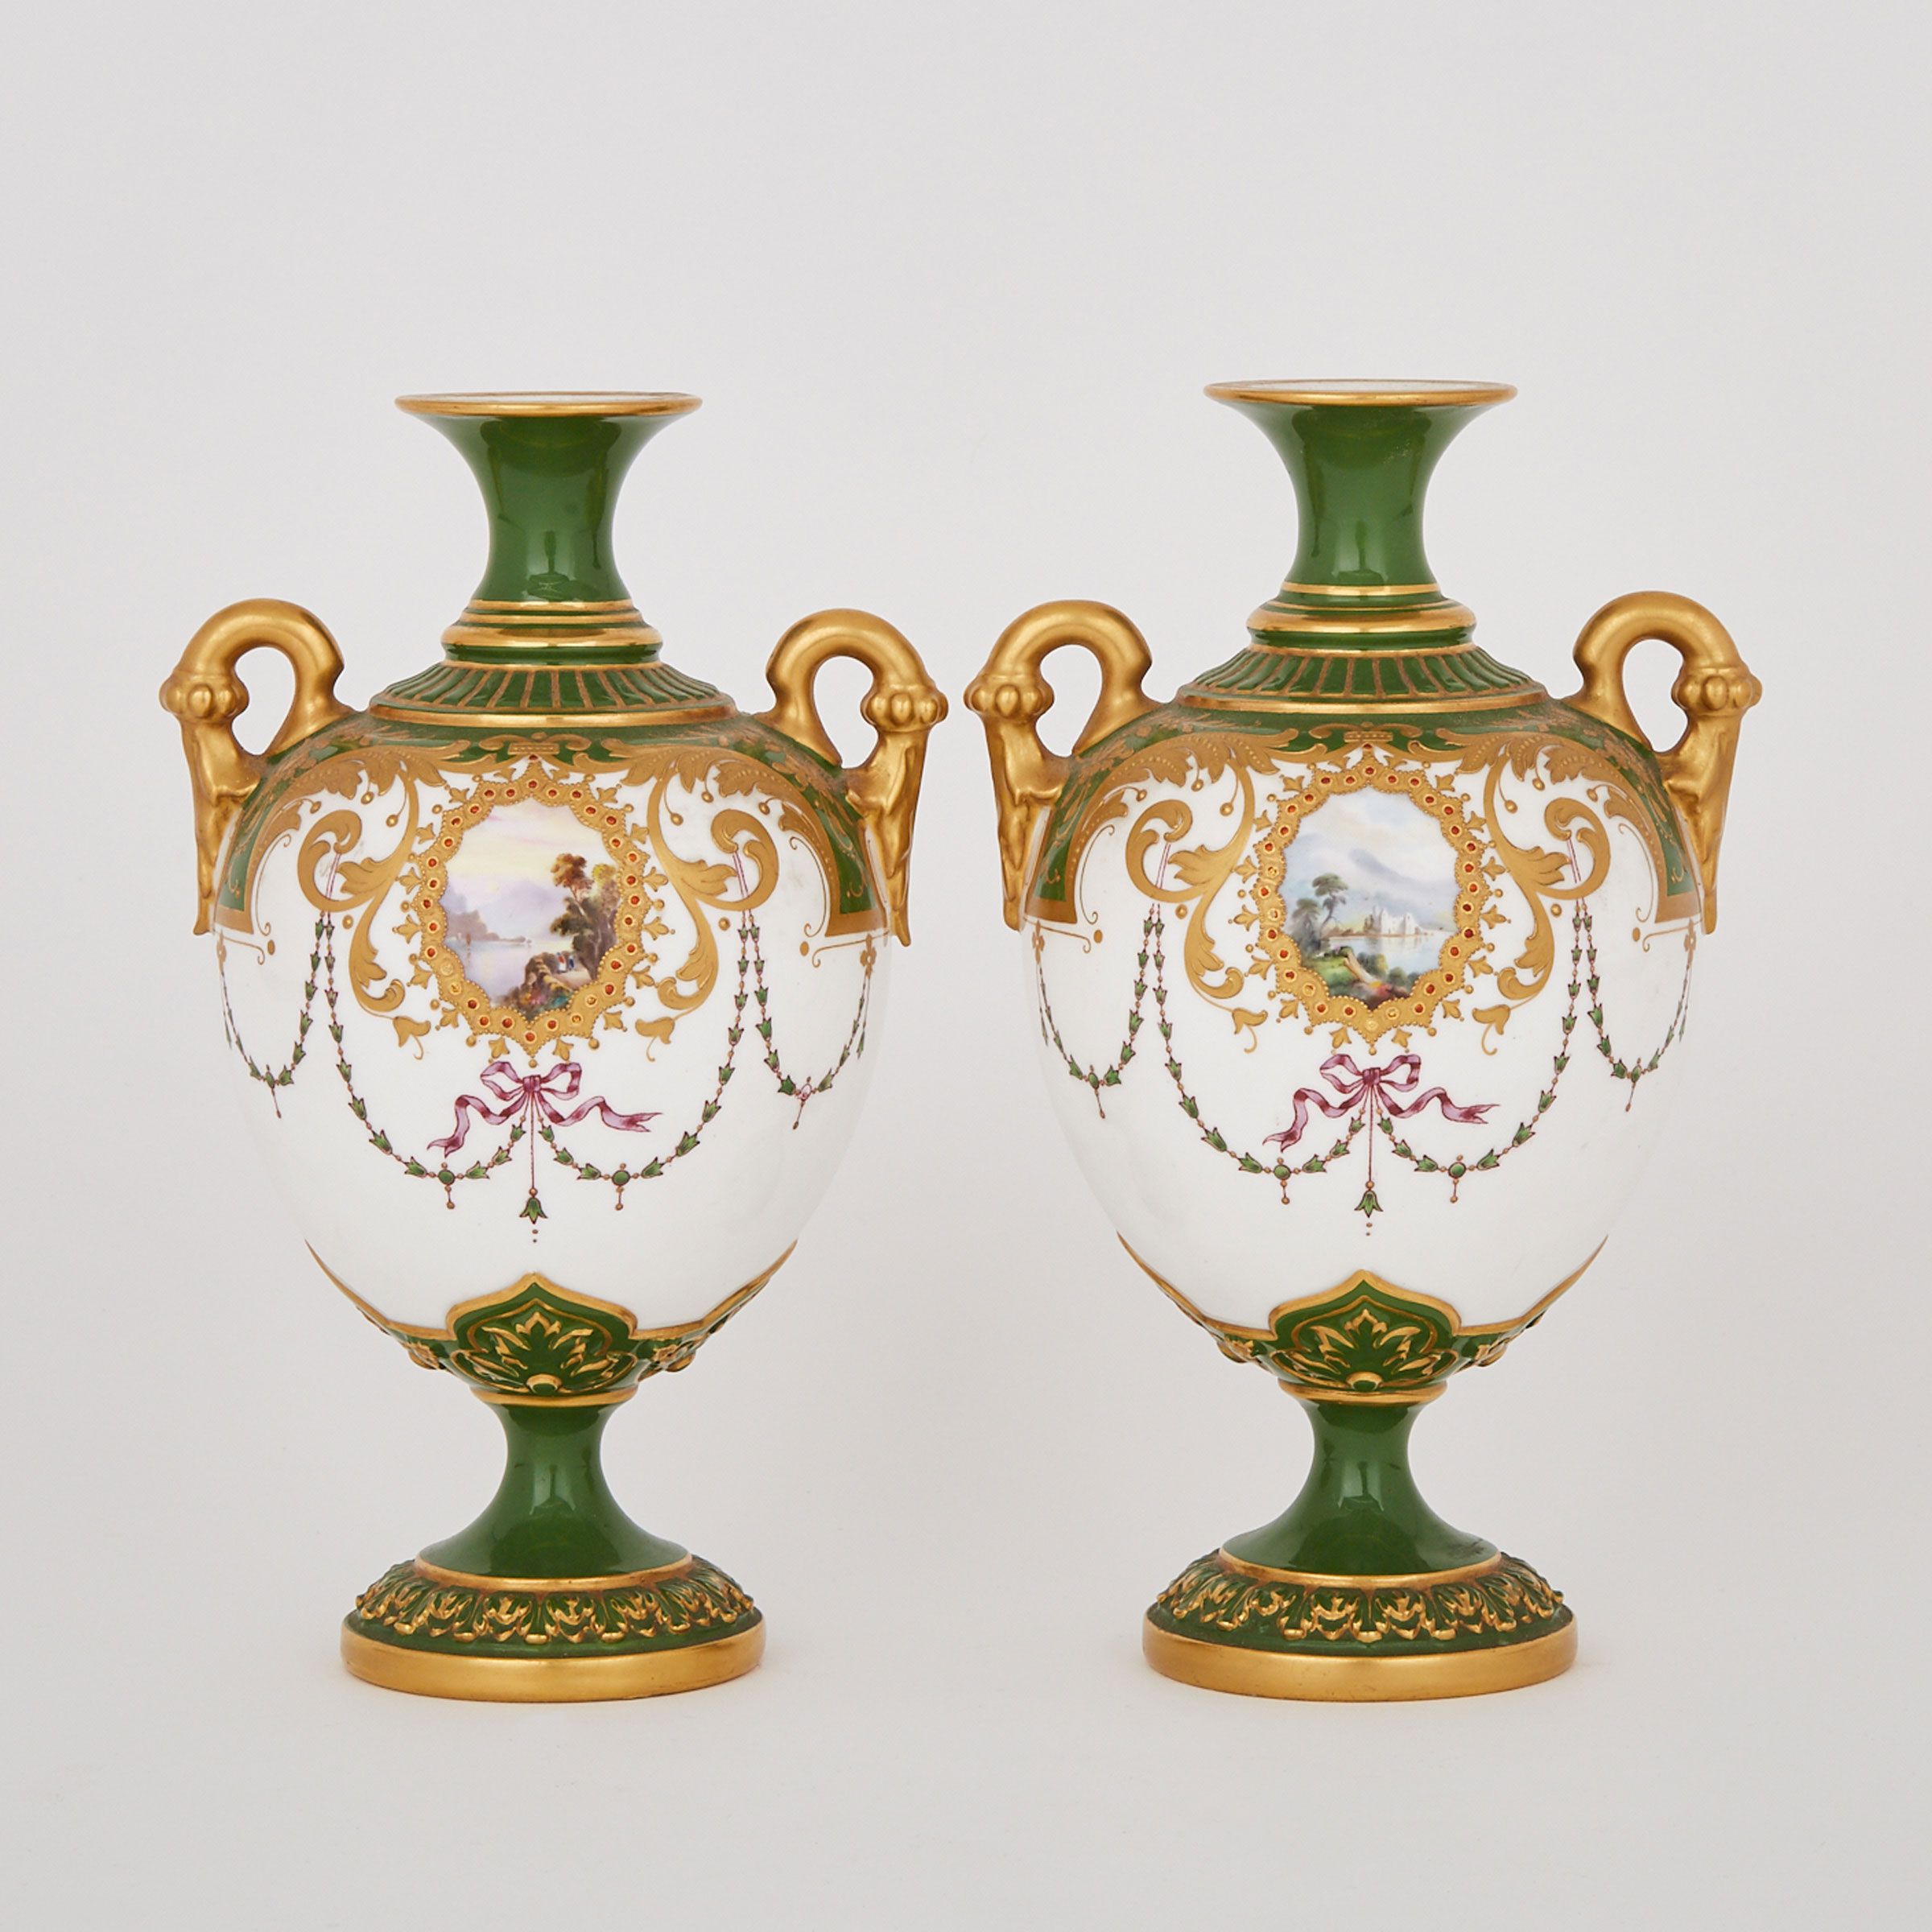 Pair of Royal Worcester ‘Jewelled’ Green and Gilt Ground Two-Handled Vases, c.1900